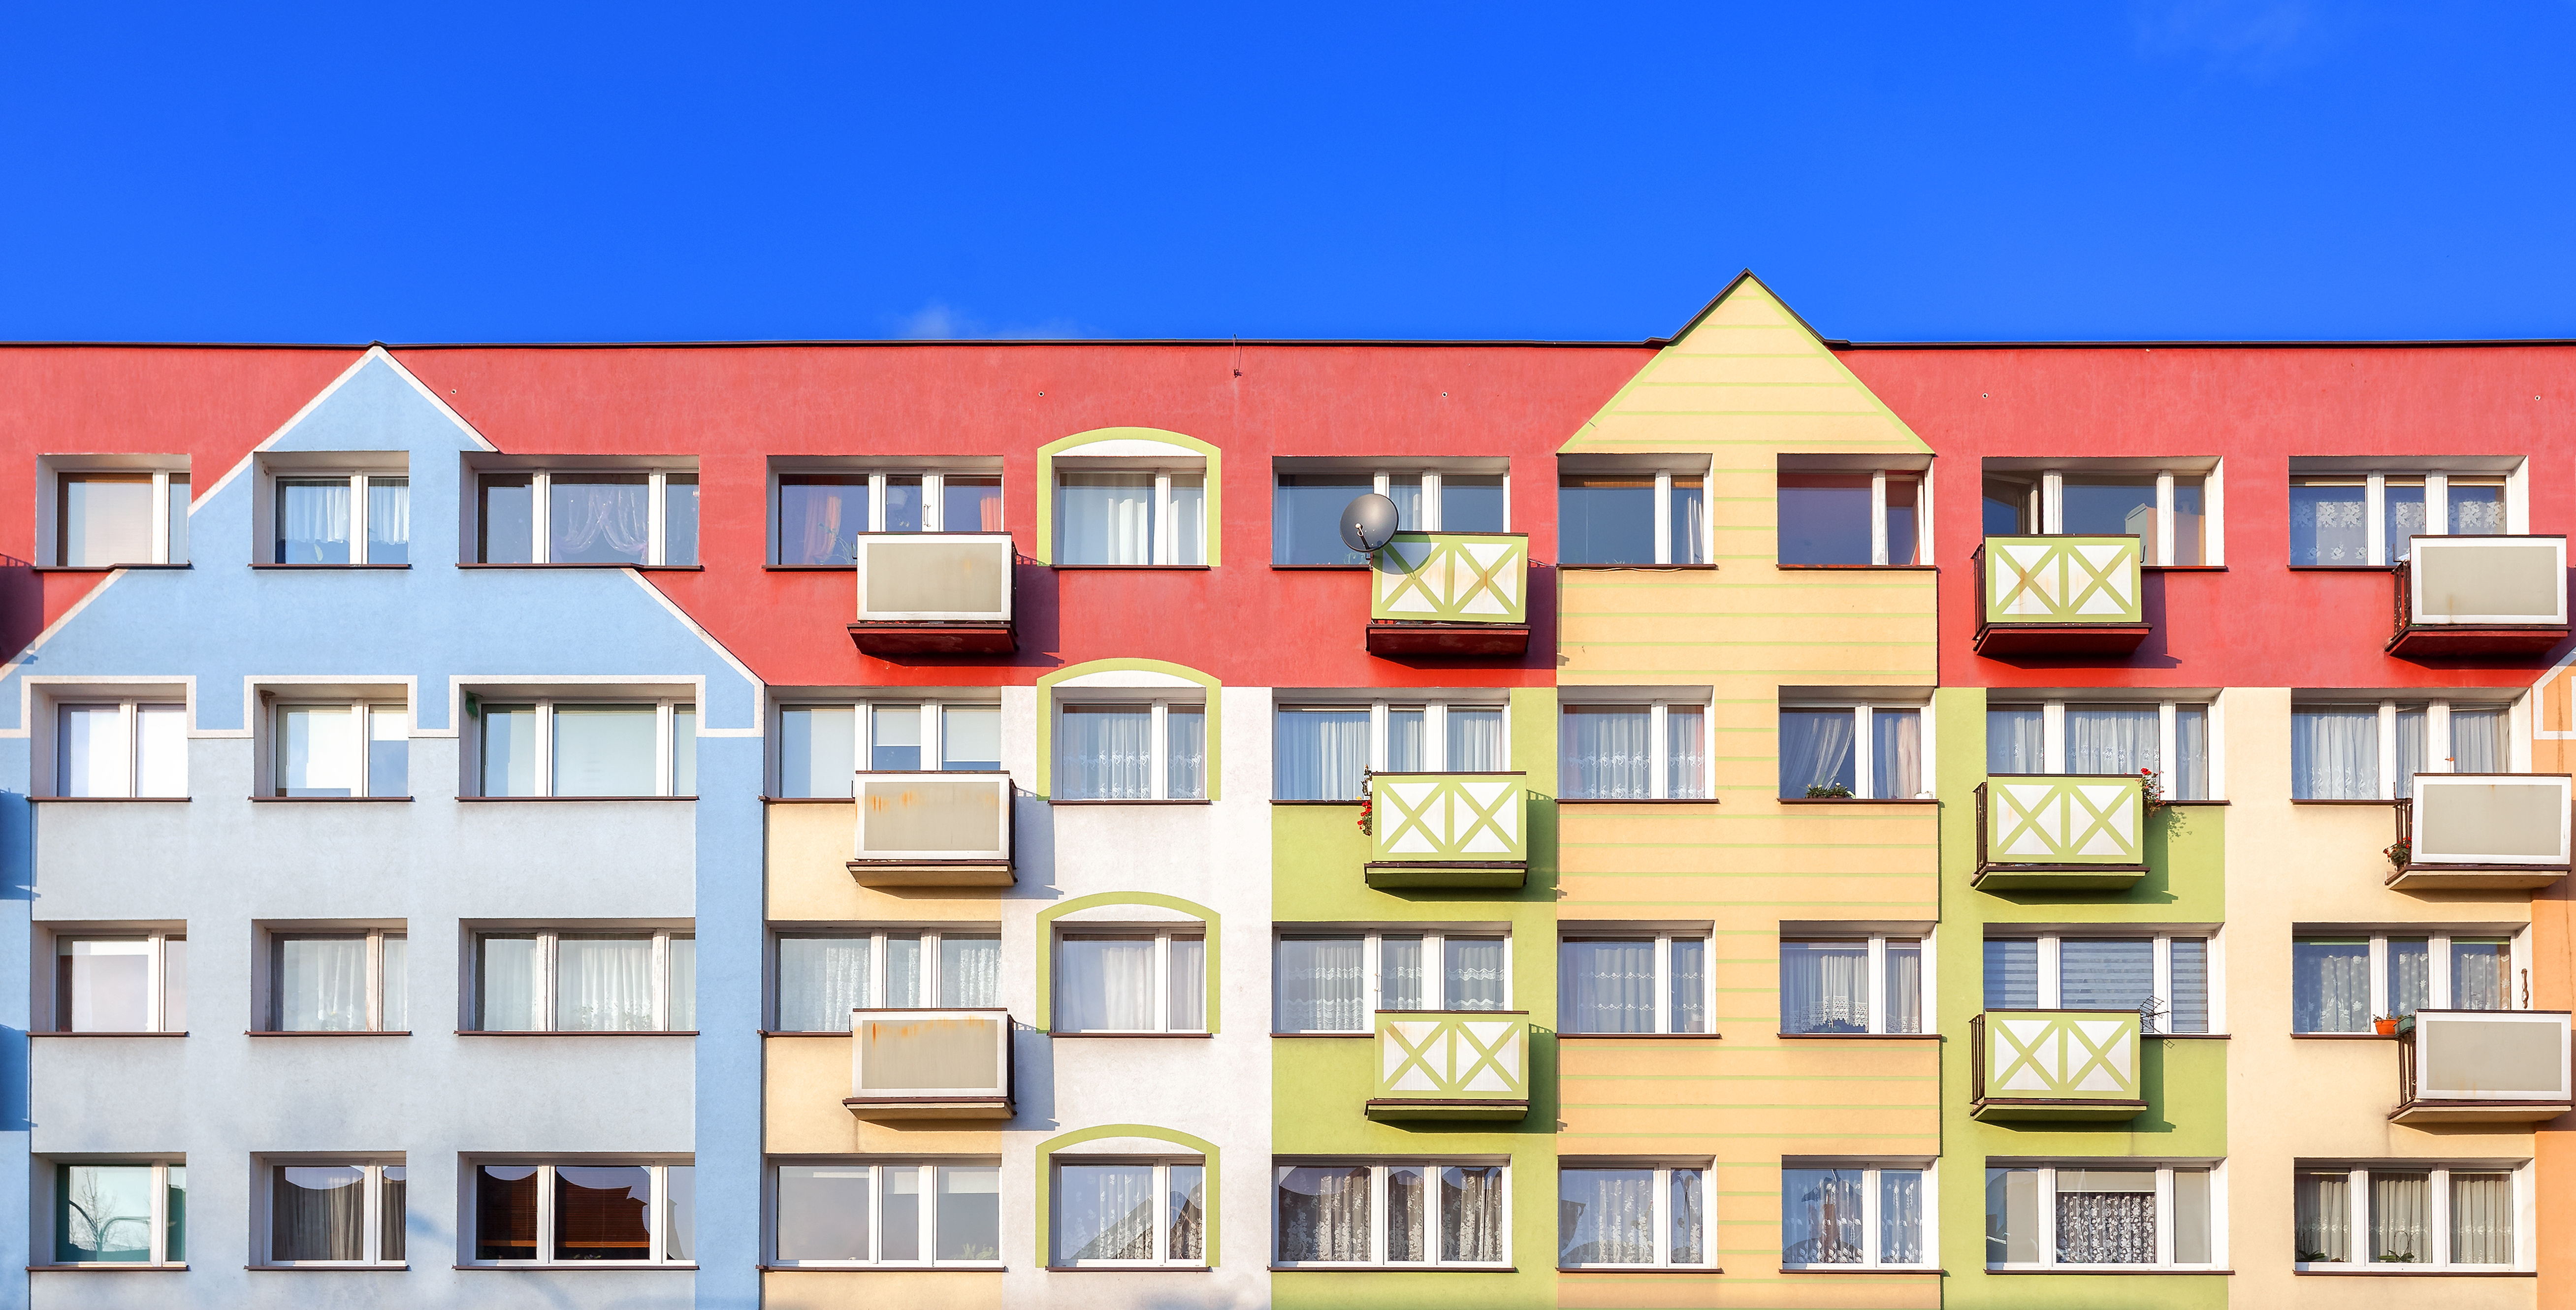 Colorful facade of a residential building.